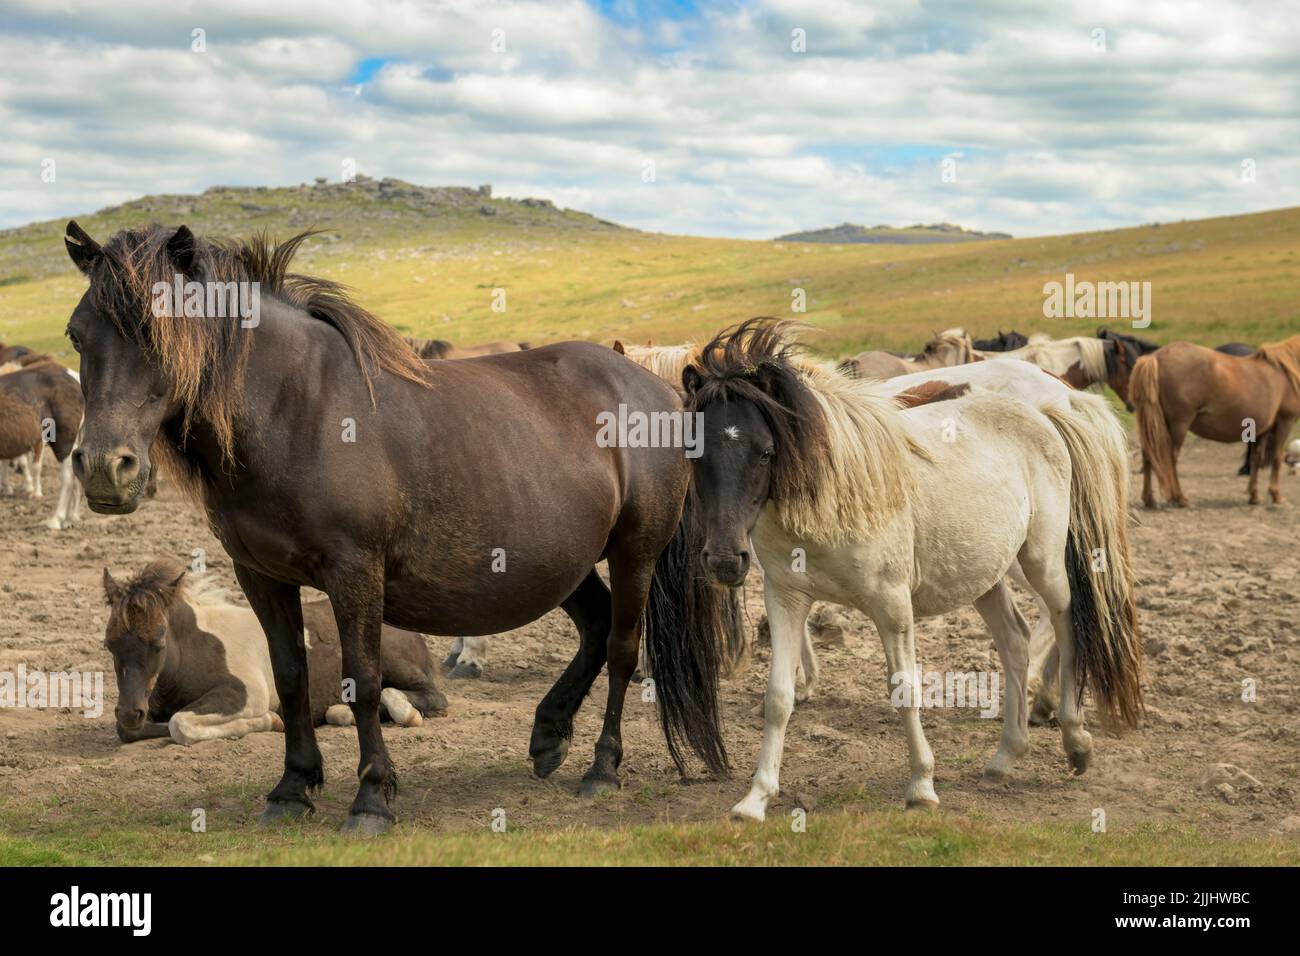 The Dartmoor pony is a breed that is native to the British Isles. They can be found roaming the moorlands of Dartmoor National Park in Devon. Stock Photo